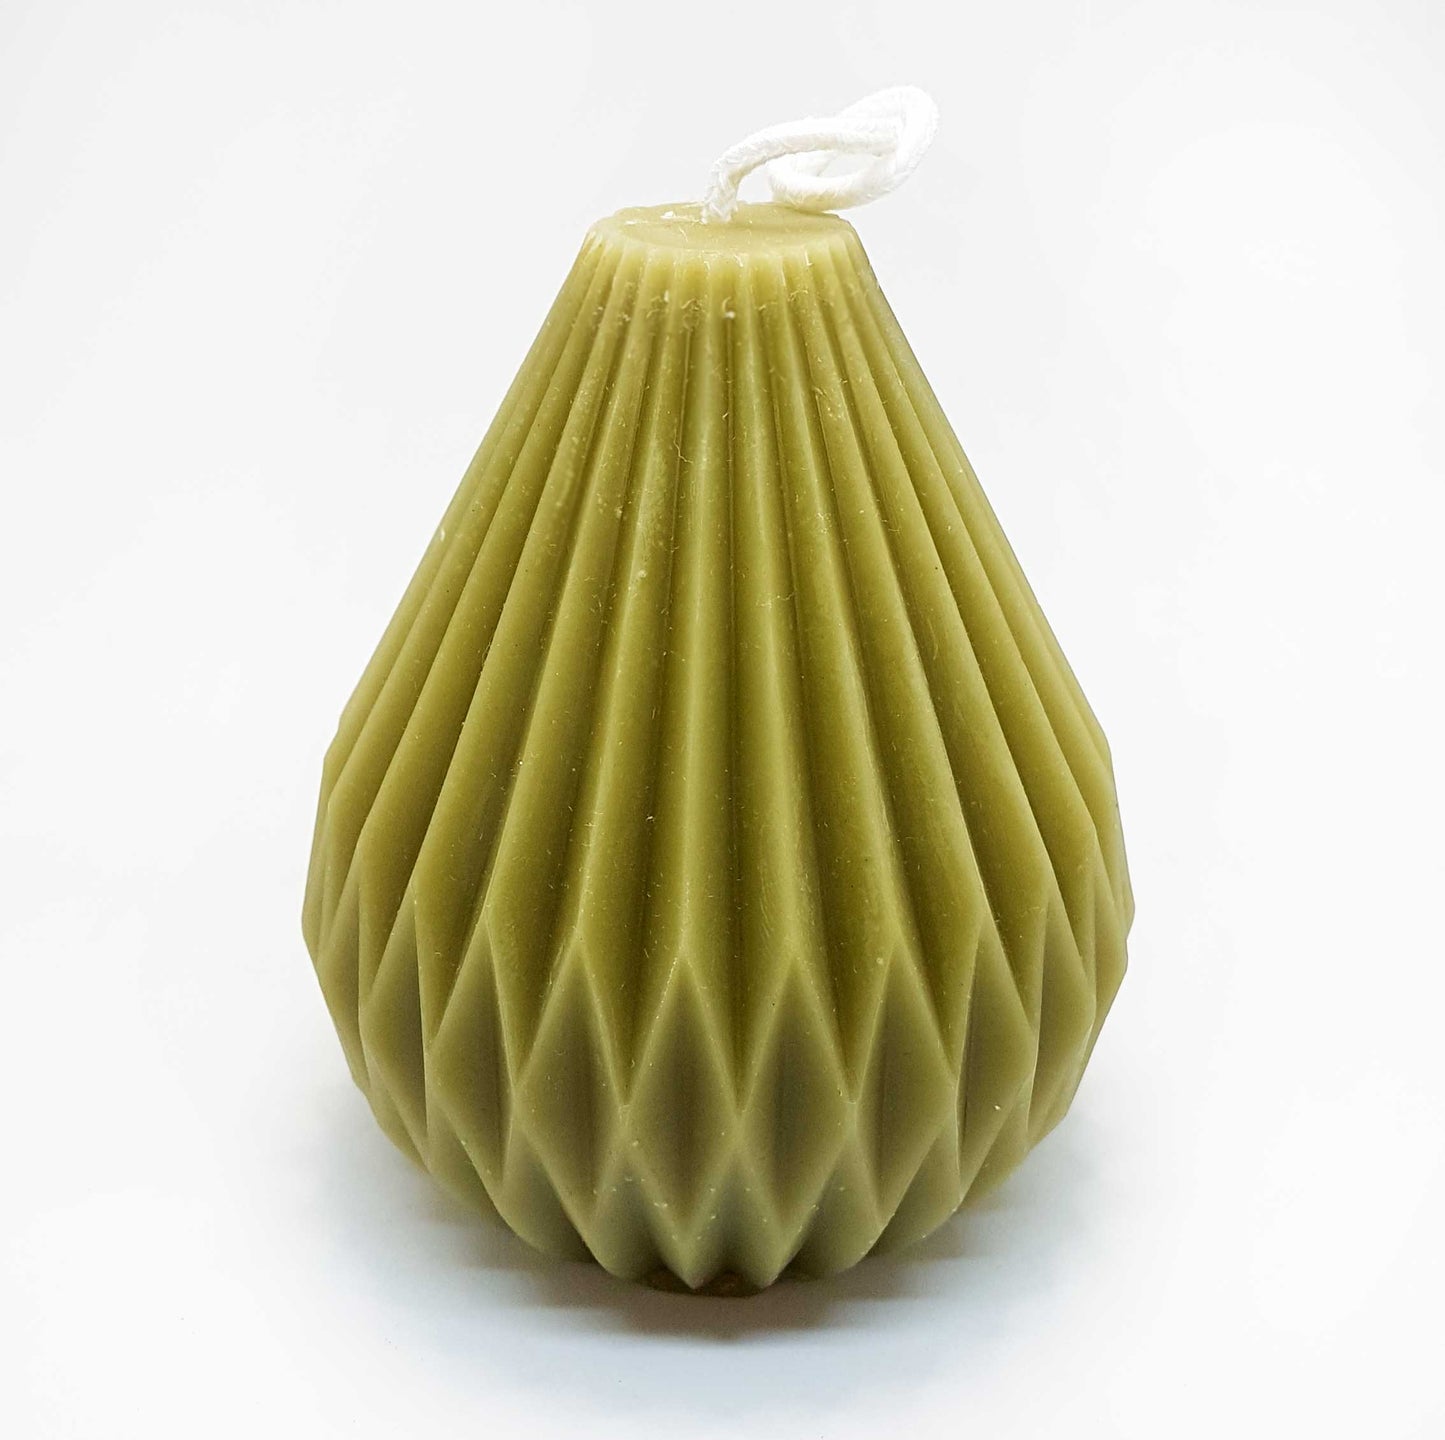 Beeswax Candle- Fluted Pyramid - 4.25" - 100% Pure Canadian Beeswax